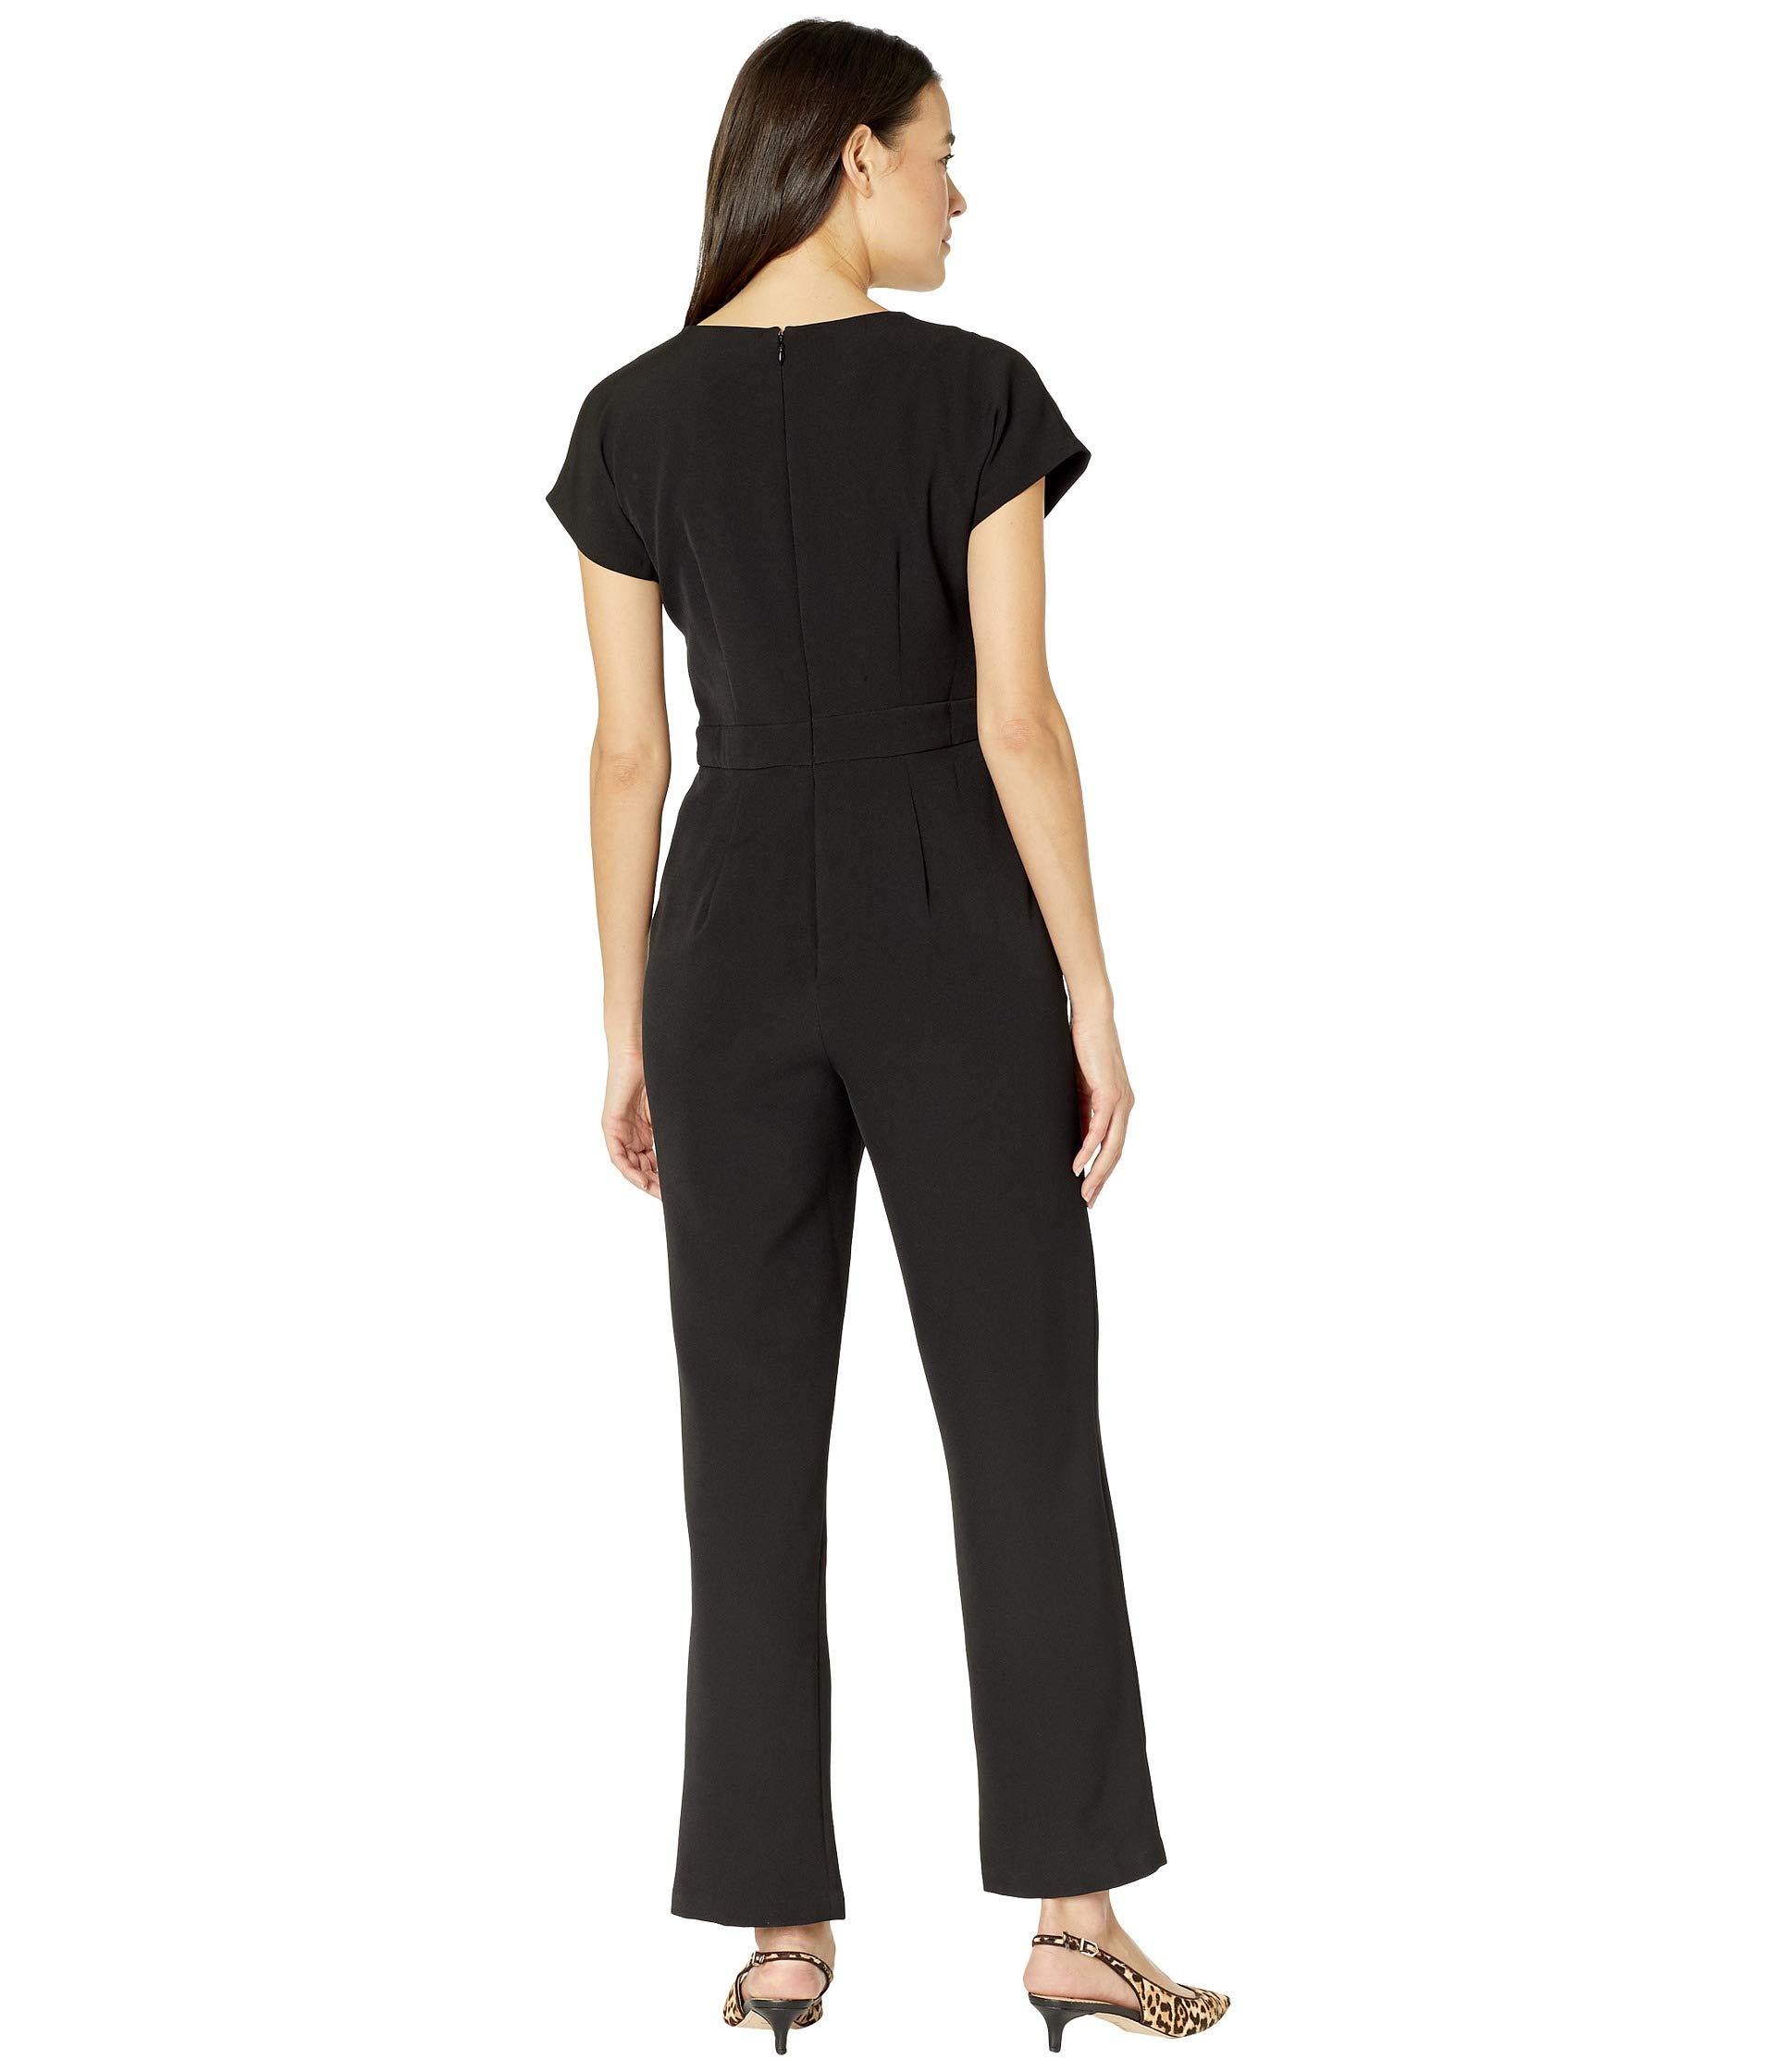 Maggy London Dream Crepe Scalloped Neck Jumpsuit in Black - Lyst